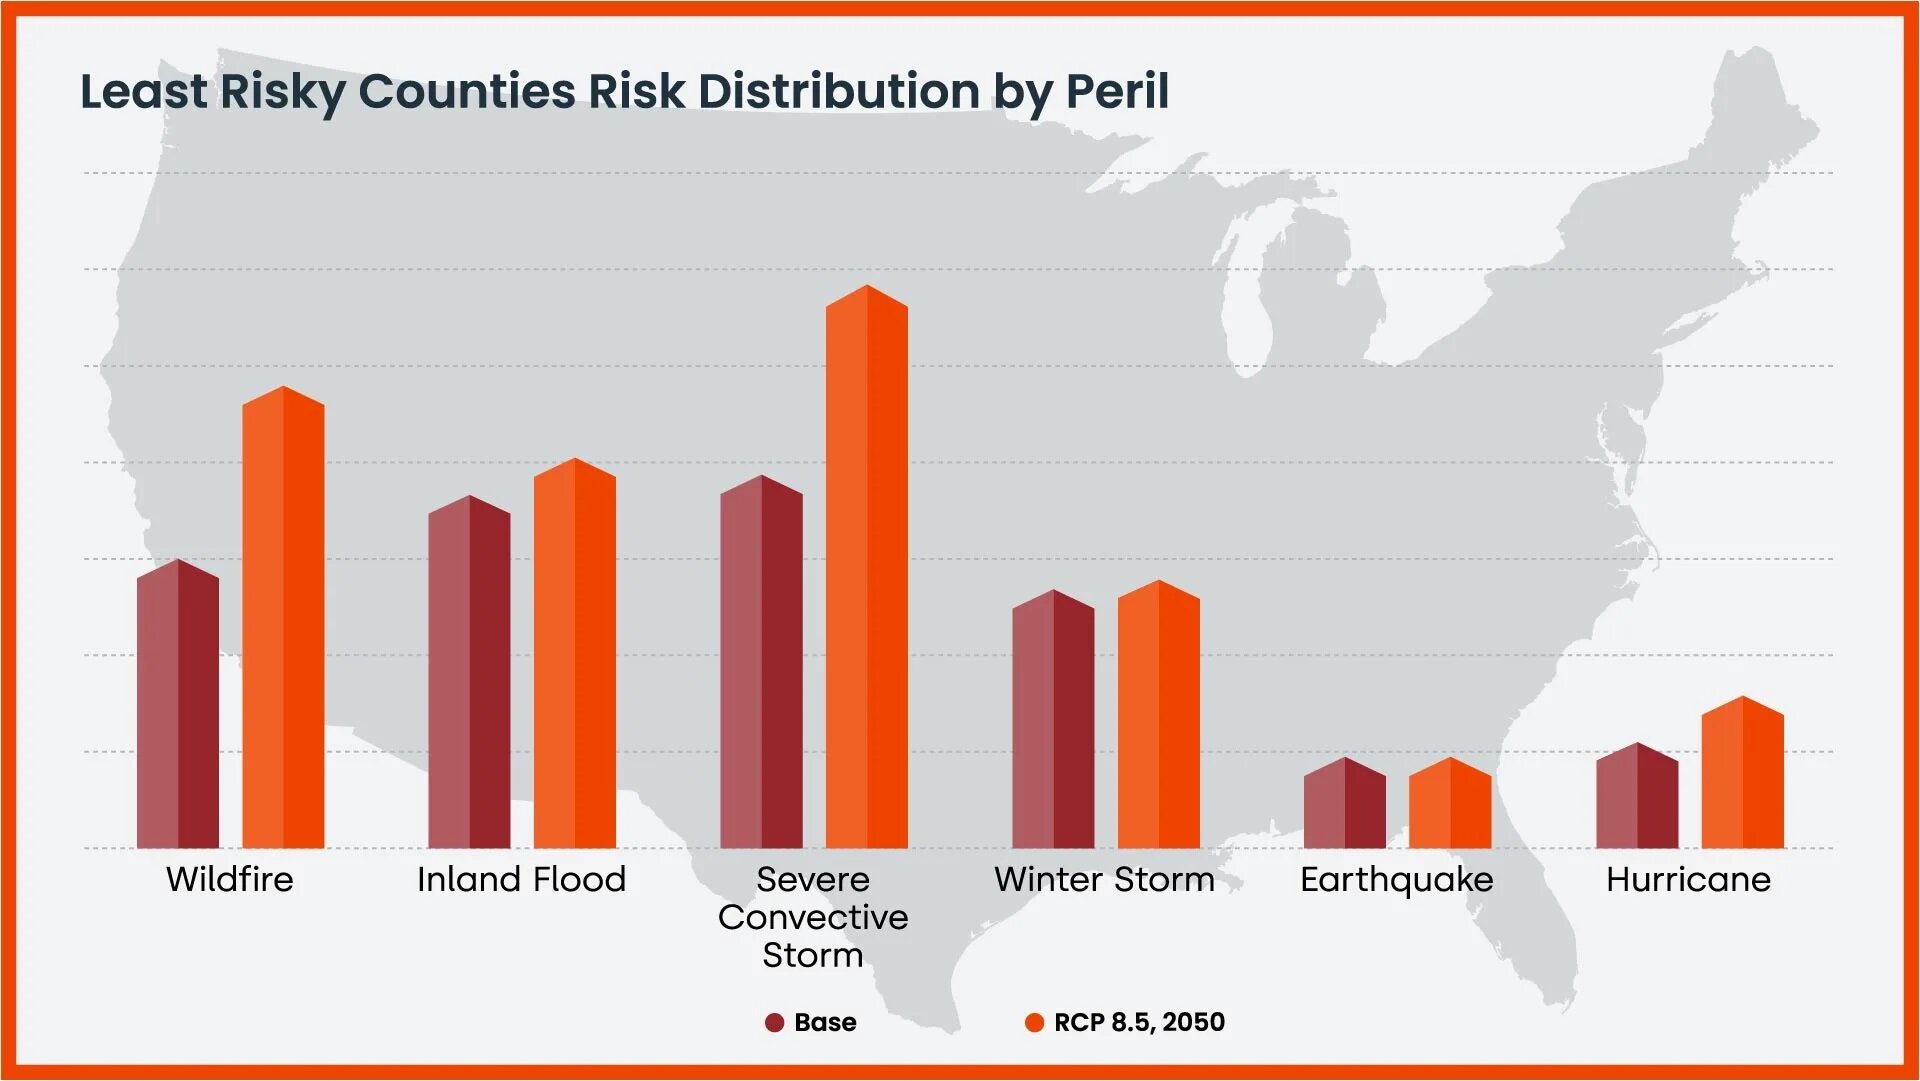 BAR-CHART-least-risk-counties-risk-distribution-by-peril.jpg